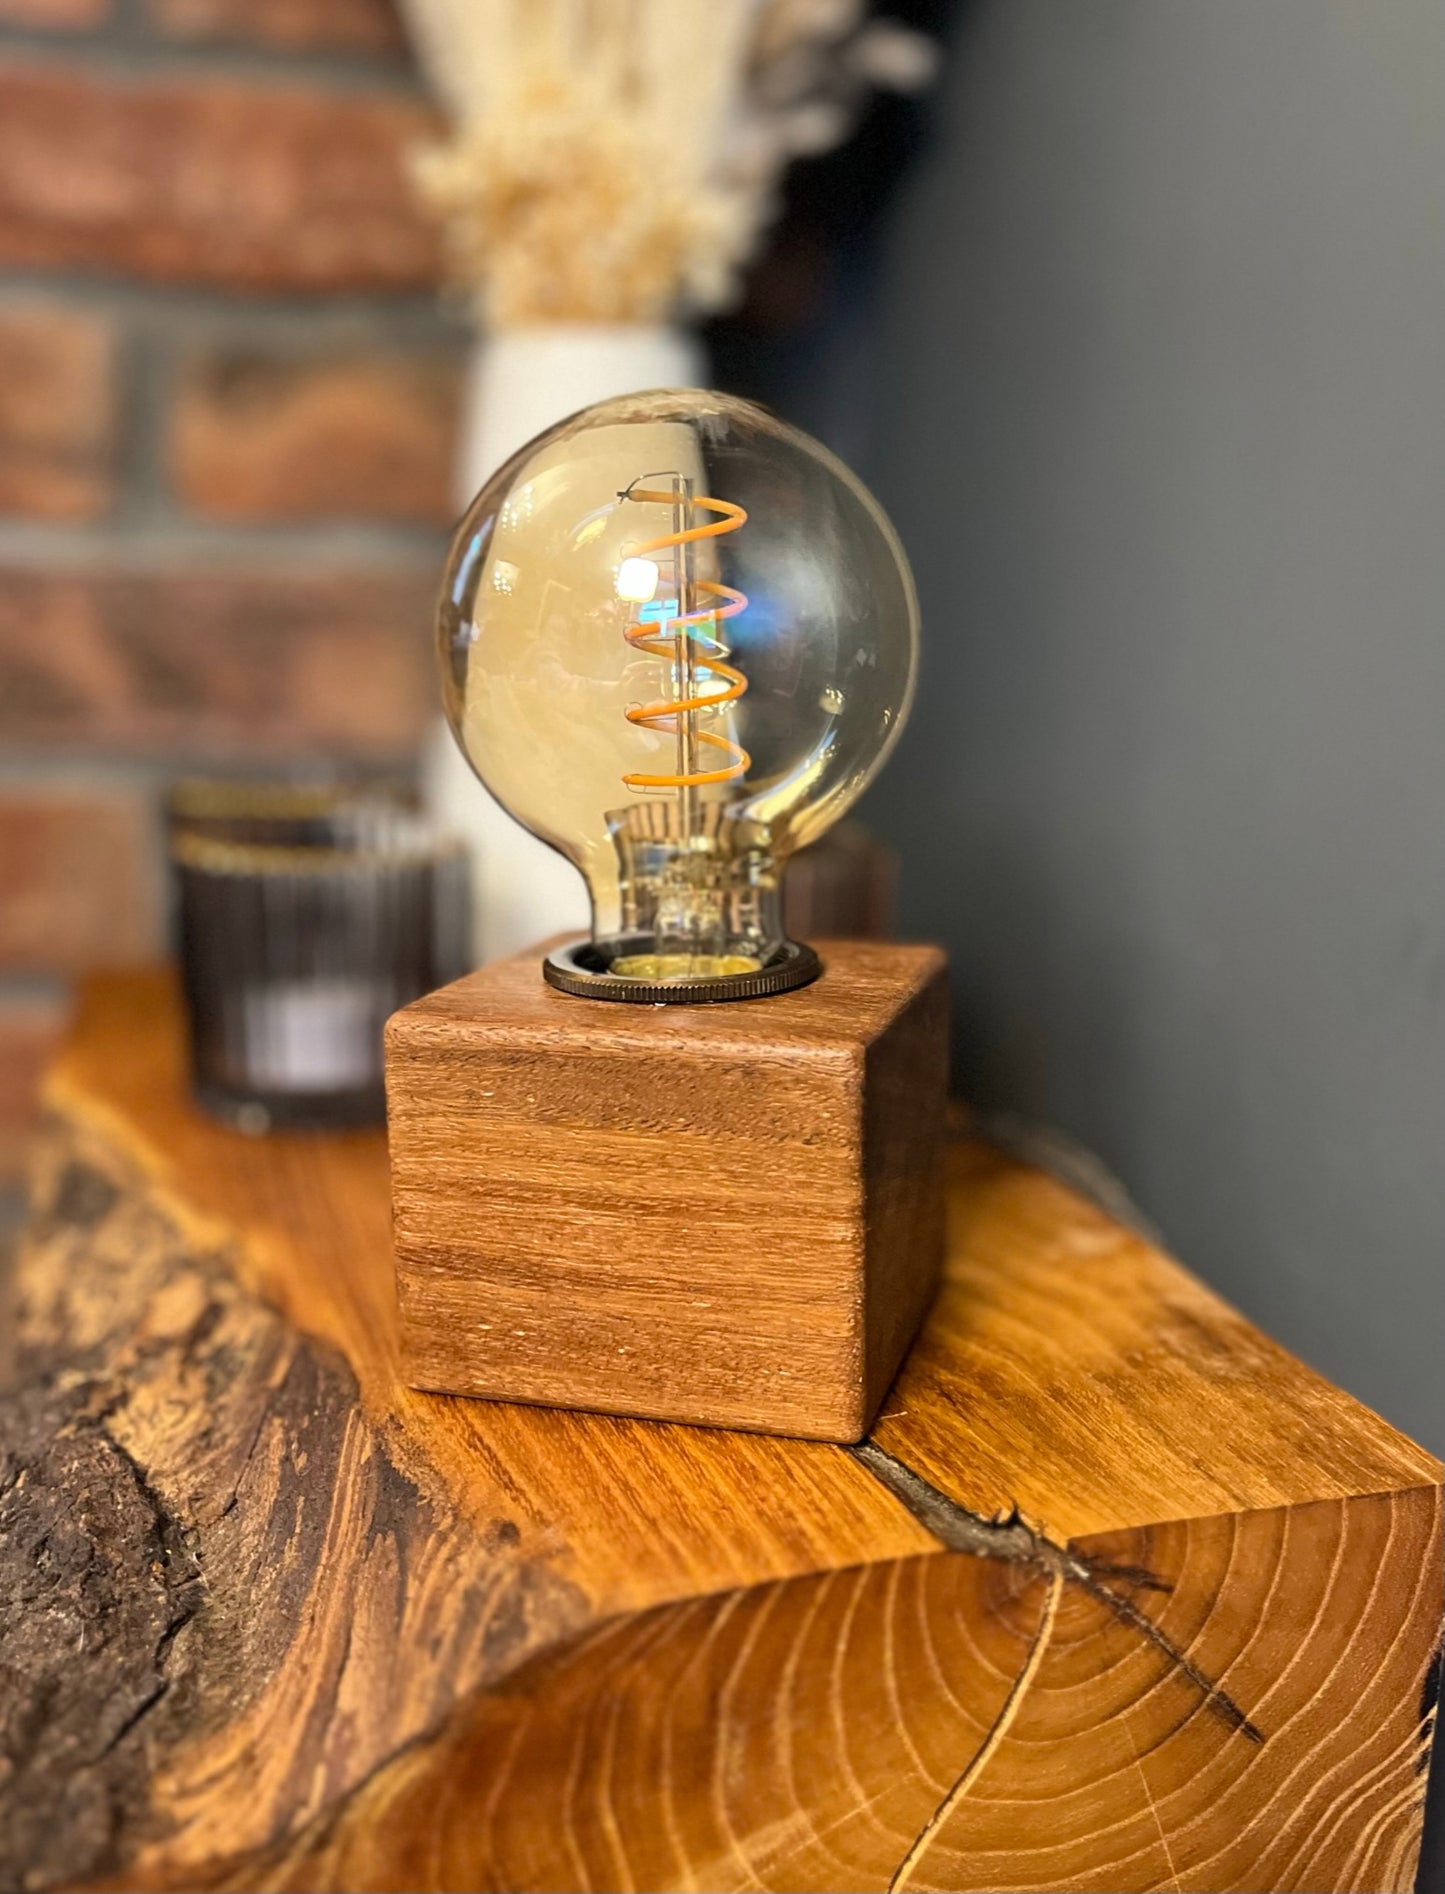 Handmade Rustic Solid Iroko Wood Cube Lamp with Brown Marl Fabric Cable